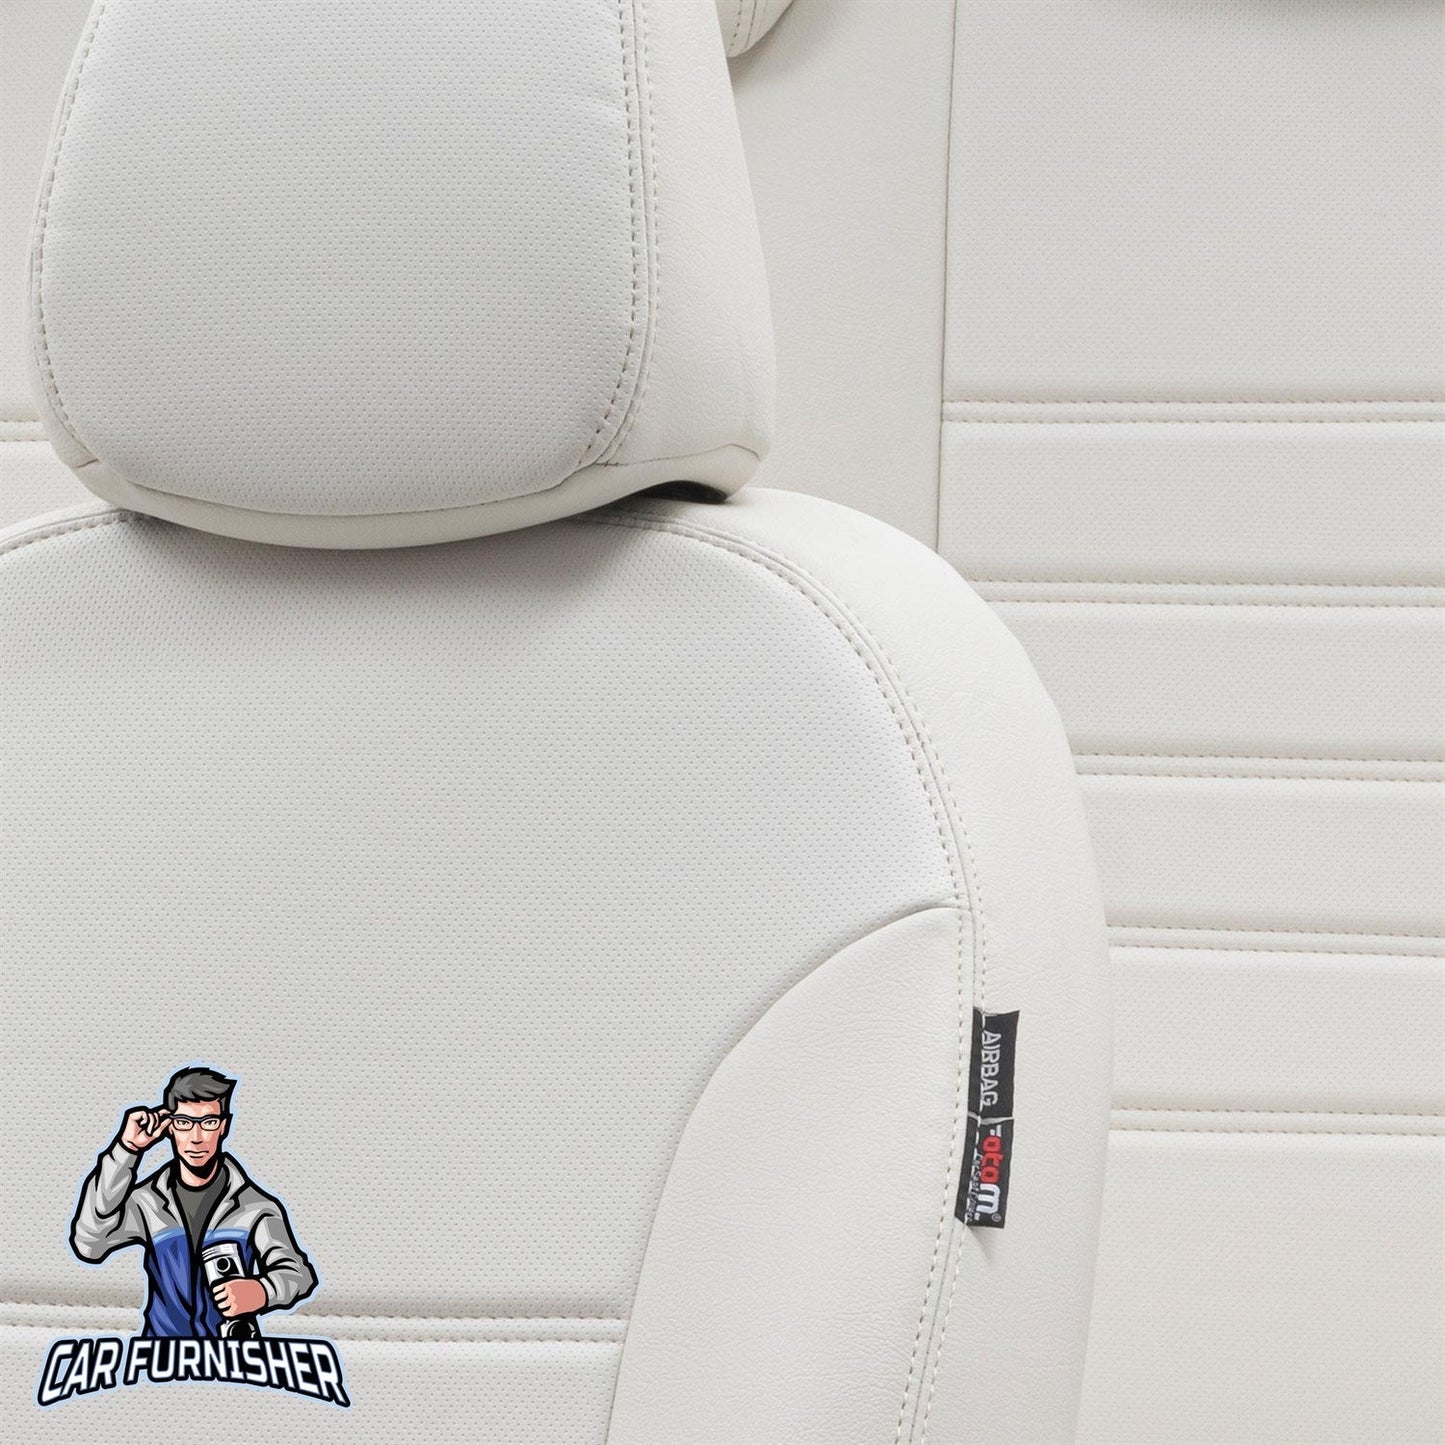 Peugeot Bipper Seat Covers Istanbul Leather Design Ivory Leather